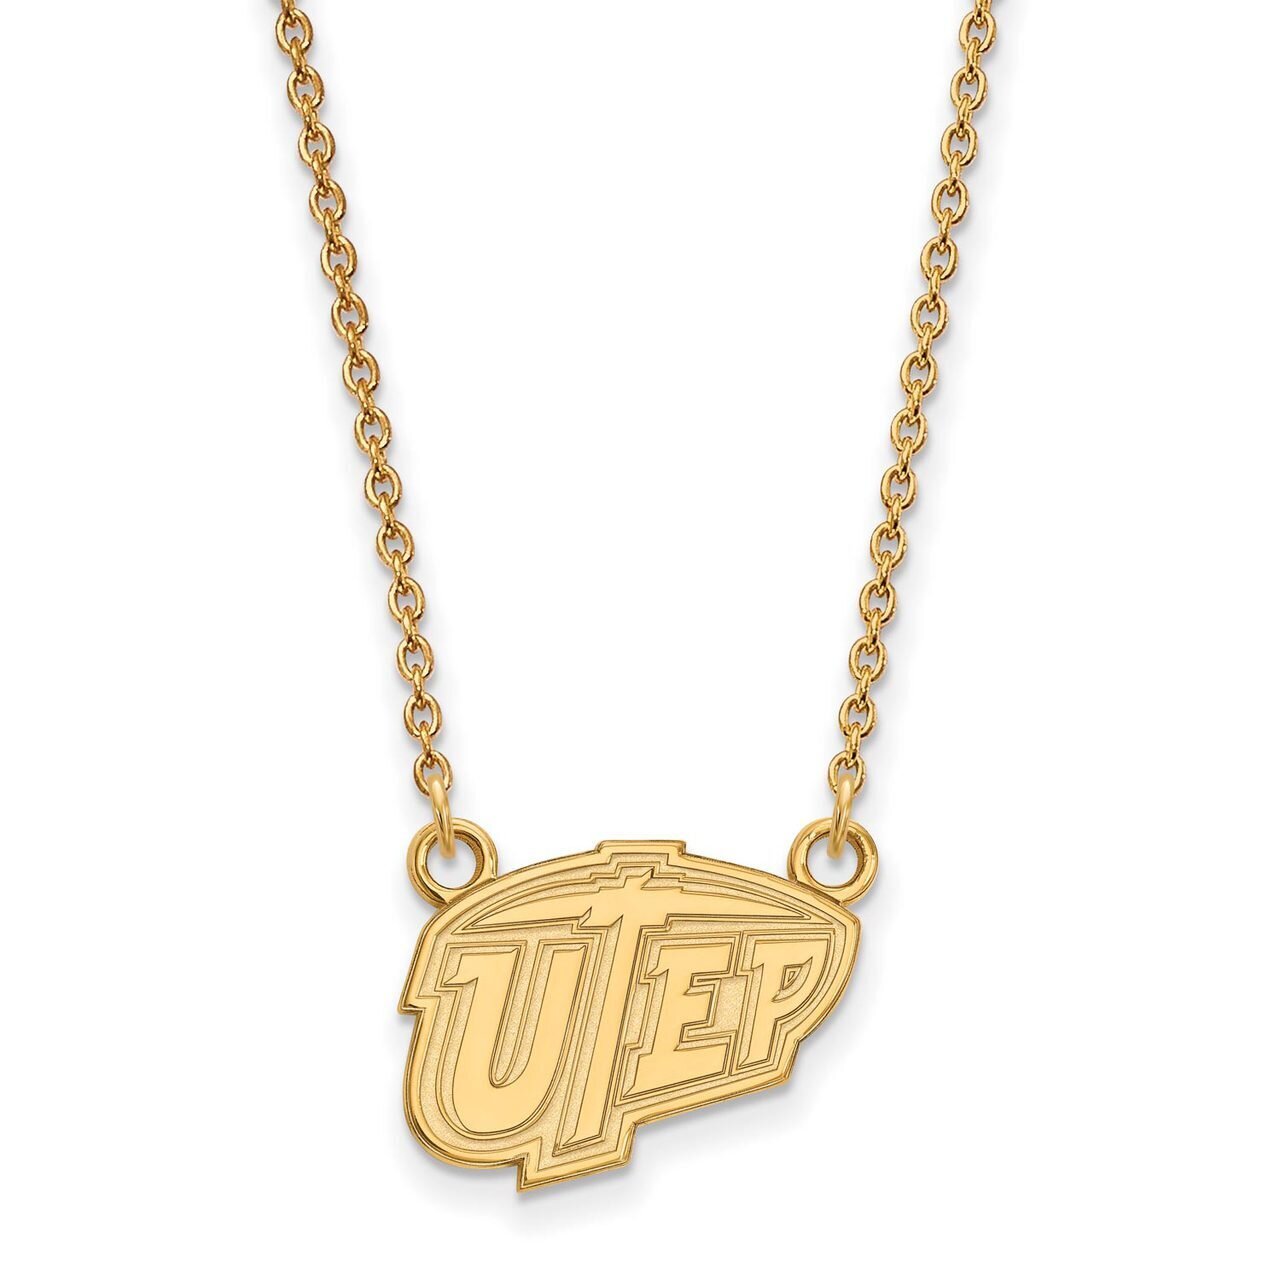 The University of Texas at El Paso Small Pendant with Chain Necklace Gold-plated Silver GP008UTE-18